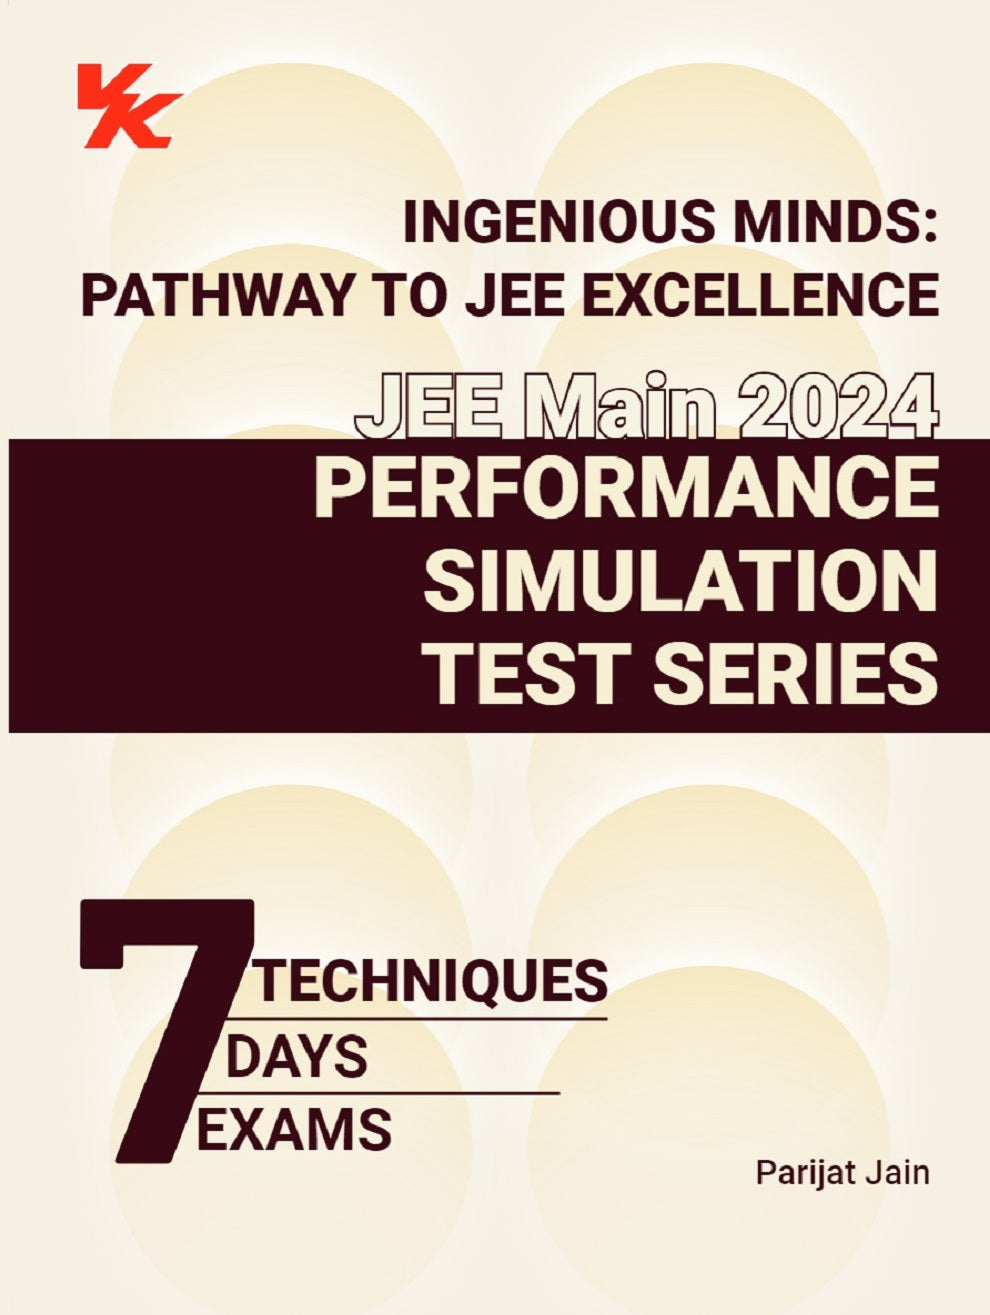 Achieve Best Results with JEE Mastery Toolkit for JEE Main 2024: 7 Techniques; 7 Days; 7 Exams by Parijat Jain (IIT Delhi, IIM Ahmedabad)